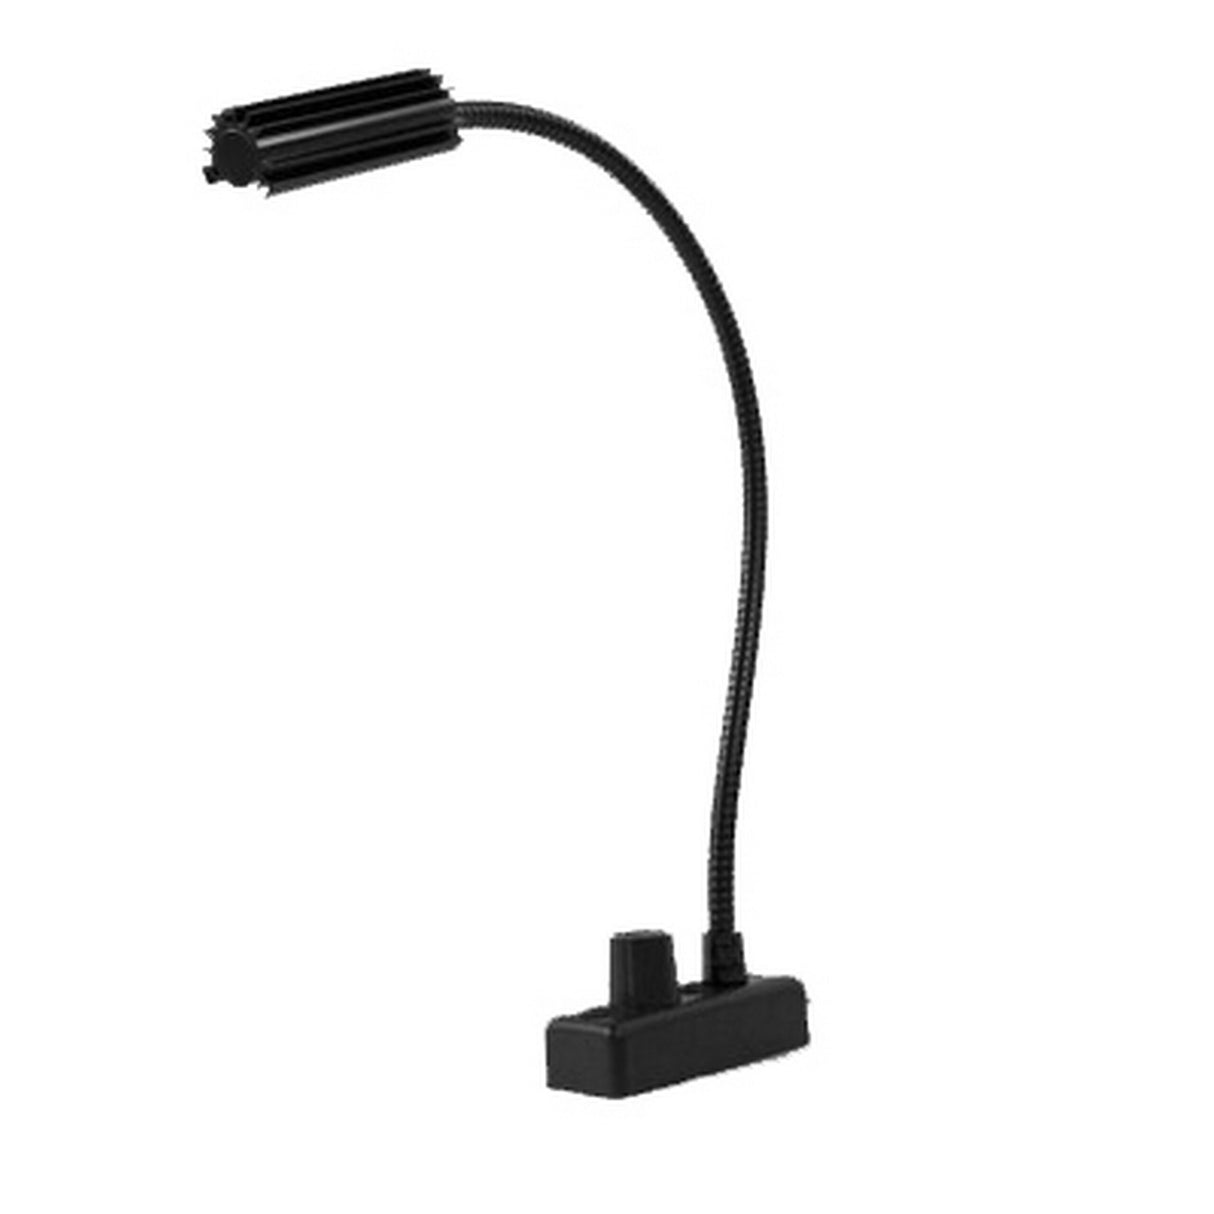 Littlite L-3/6A 6 Inch High Intensity Gooseneck Lampset with No Power Supply